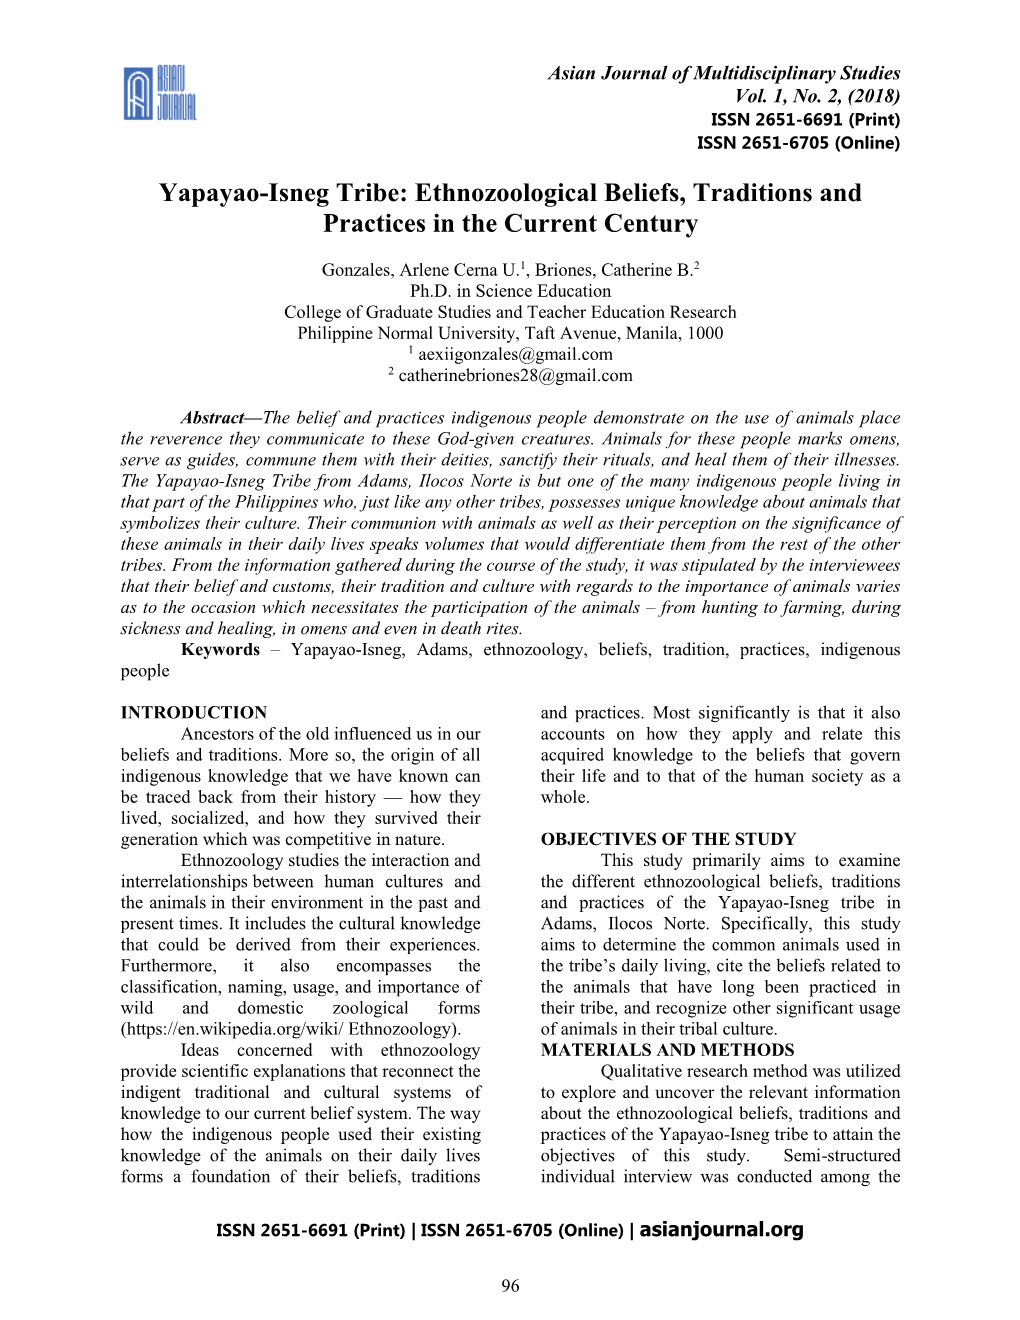 Yapayao-Isneg Tribe: Ethnozoological Beliefs, Traditions and Practices in the Current Century